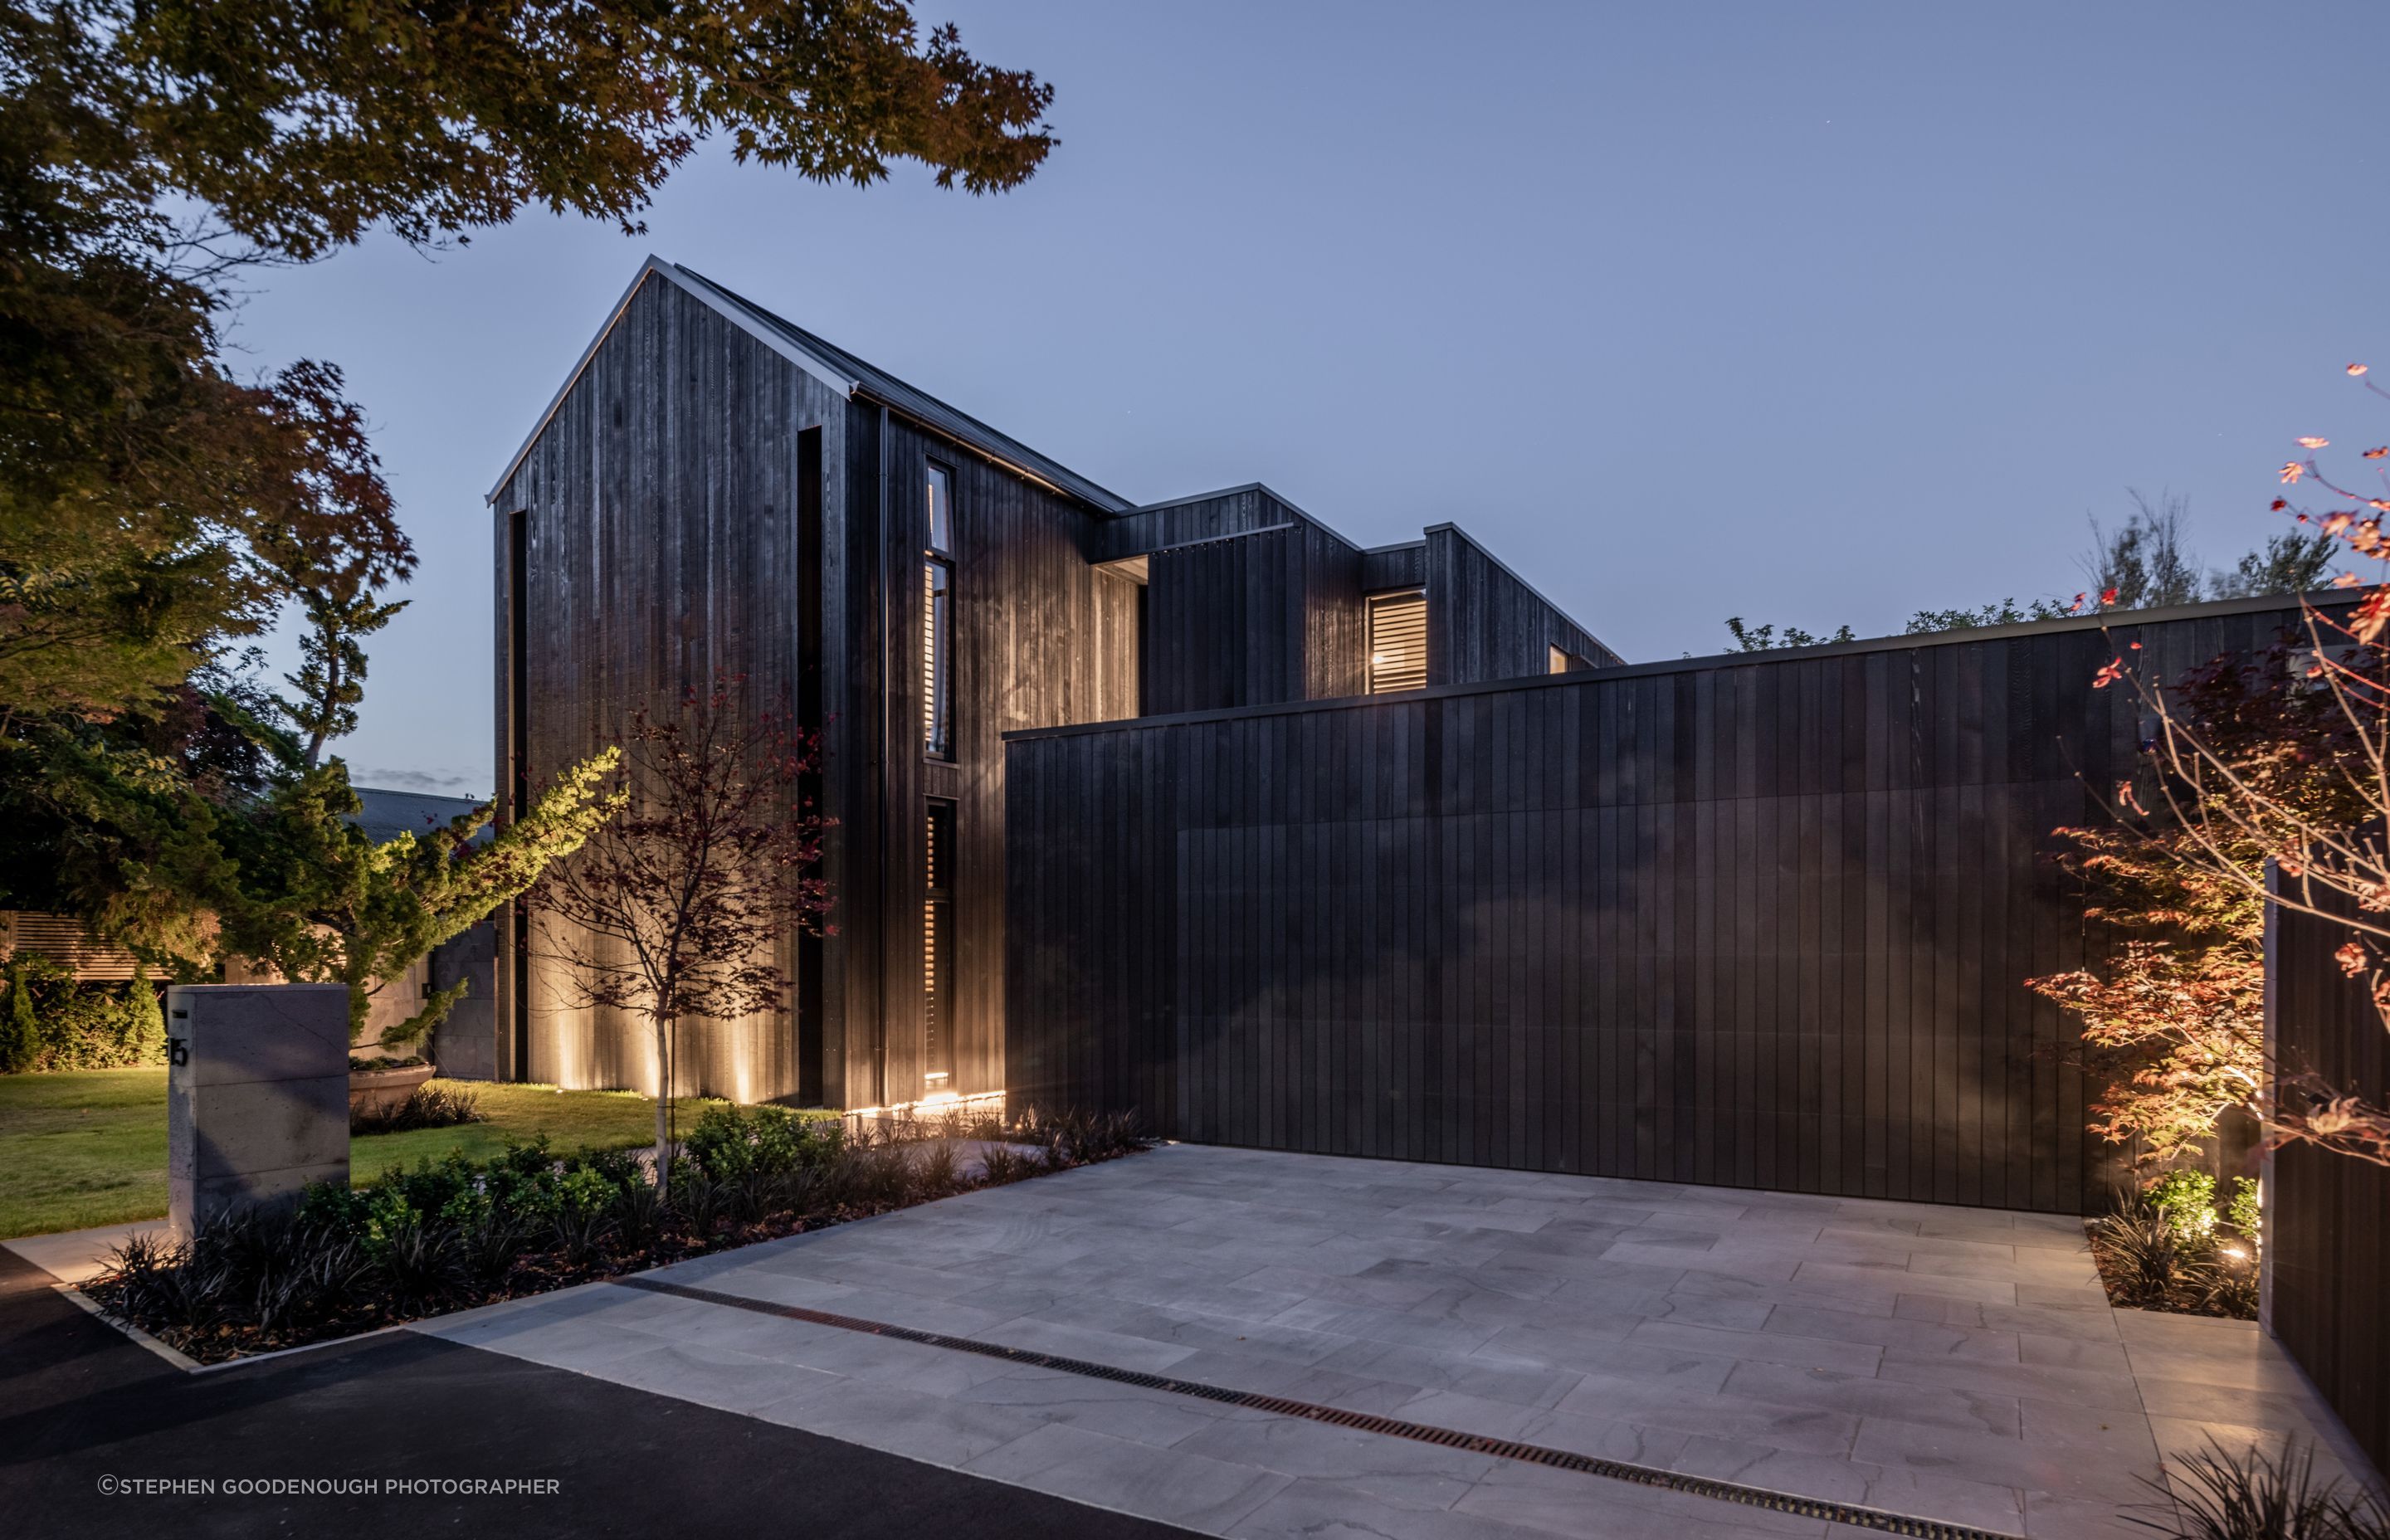 A dark exterior allows the Japanese maple trees and surrounding nature to be the focus.